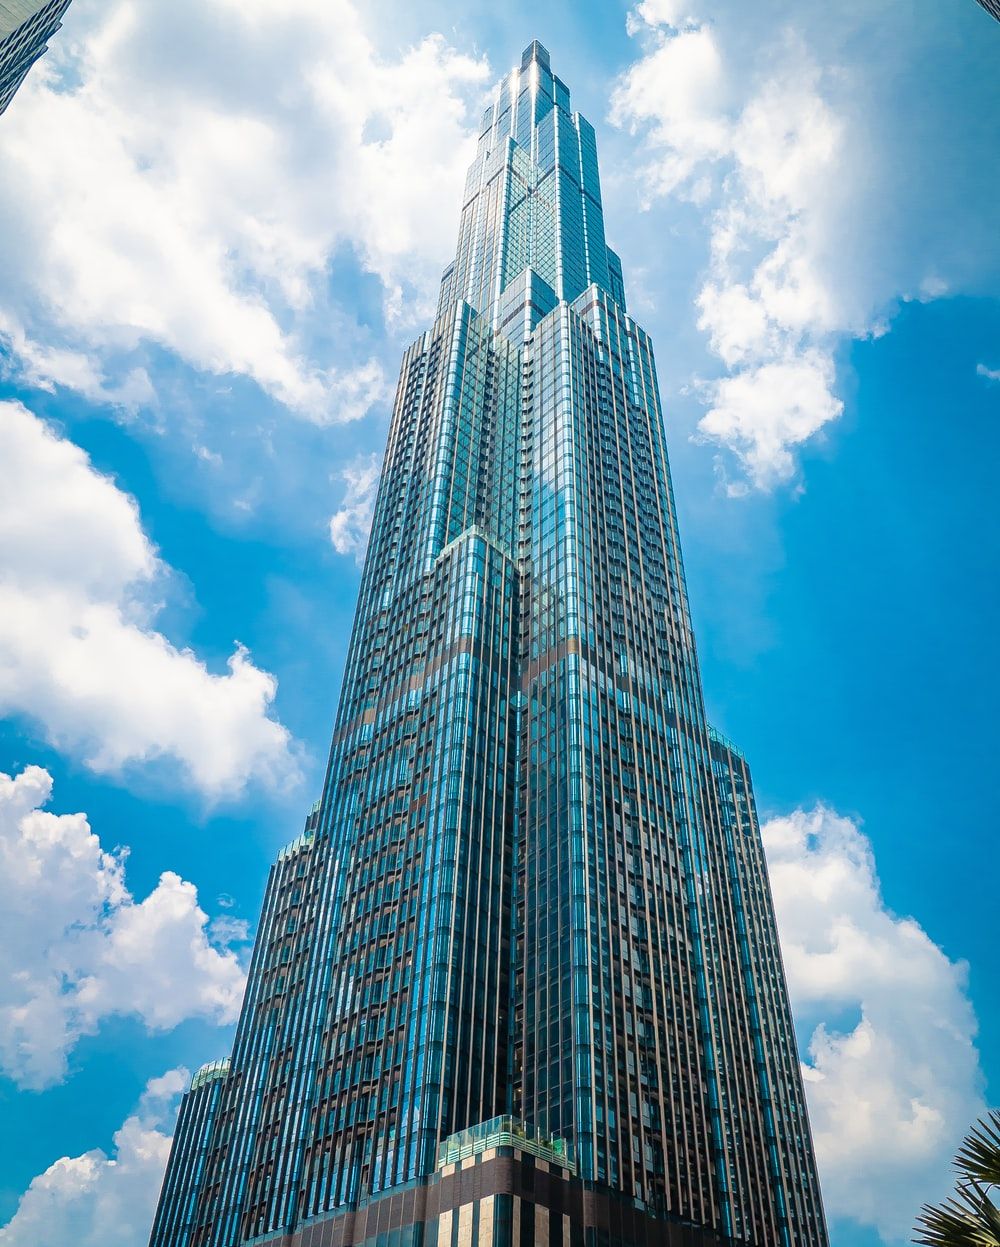 Tallest Building Picture. Download Free Image